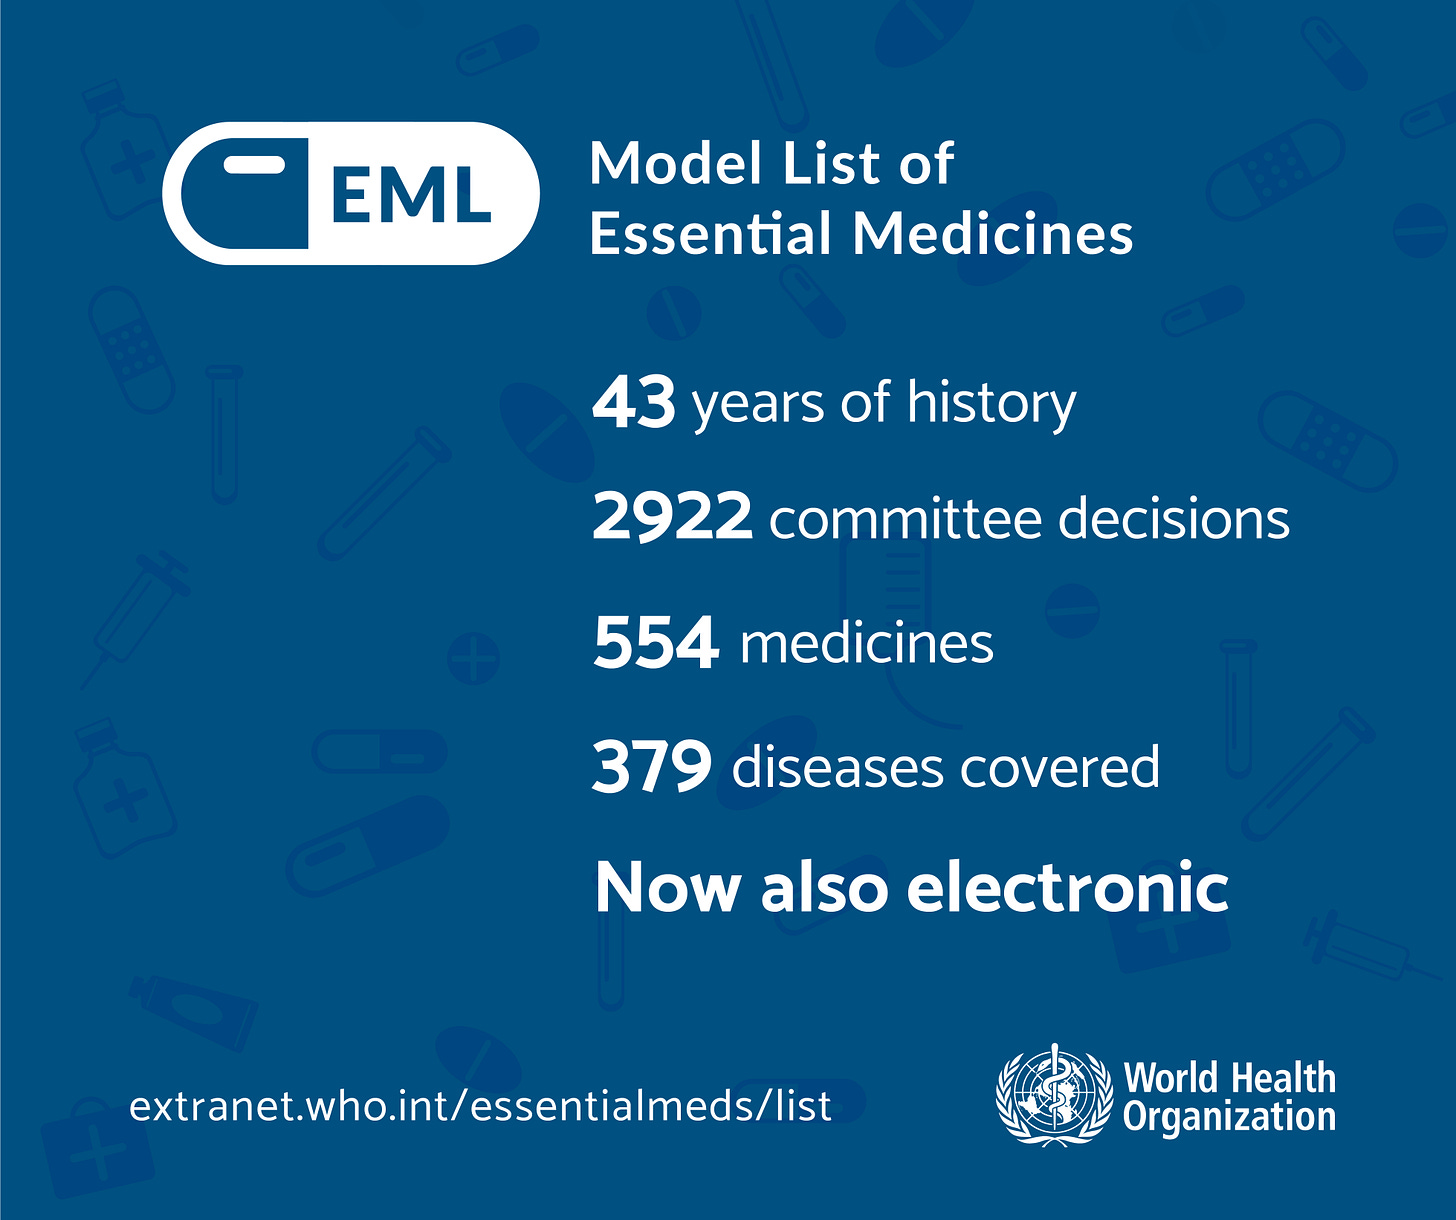 World Health Organization (WHO) on Twitter: "@DrTedros The World Health  Organization has launched a new easy-to-access, digital version of its  Model list of #EssentialMedicines. The move will revolutionize the way this  core